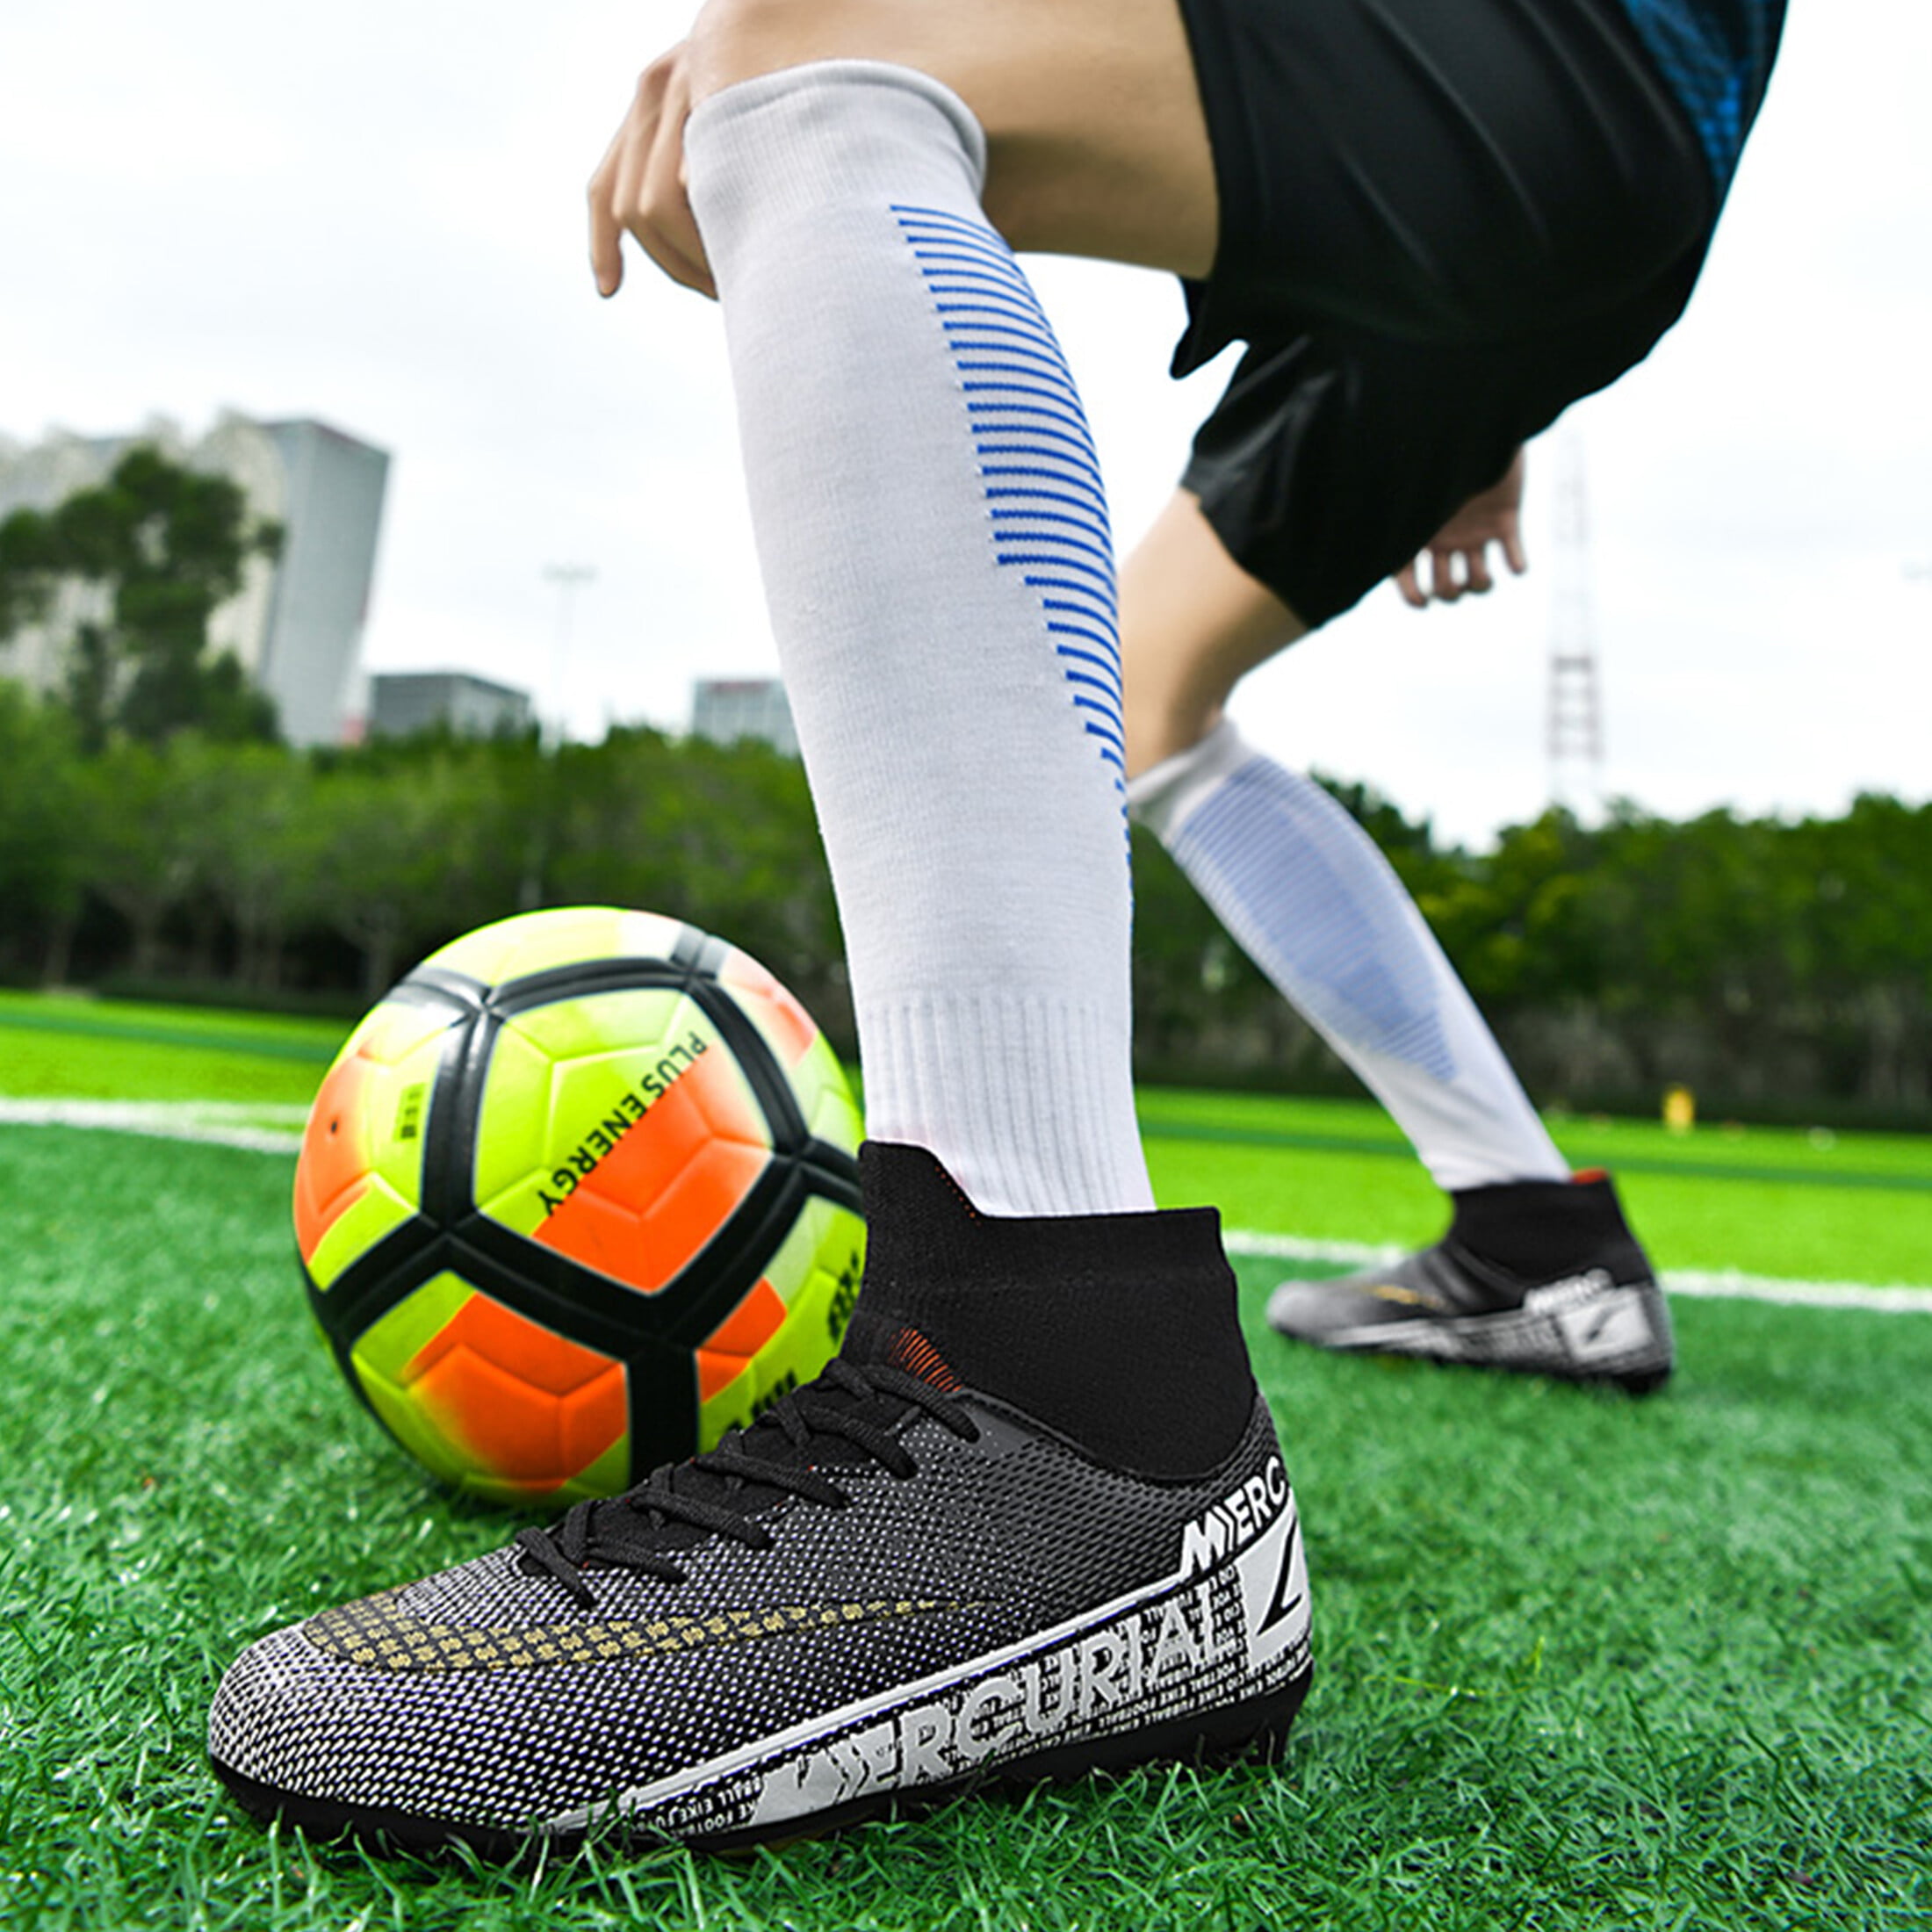 Men's Soccer Shoes Teenagers Cleats Spikes Sock Design Football